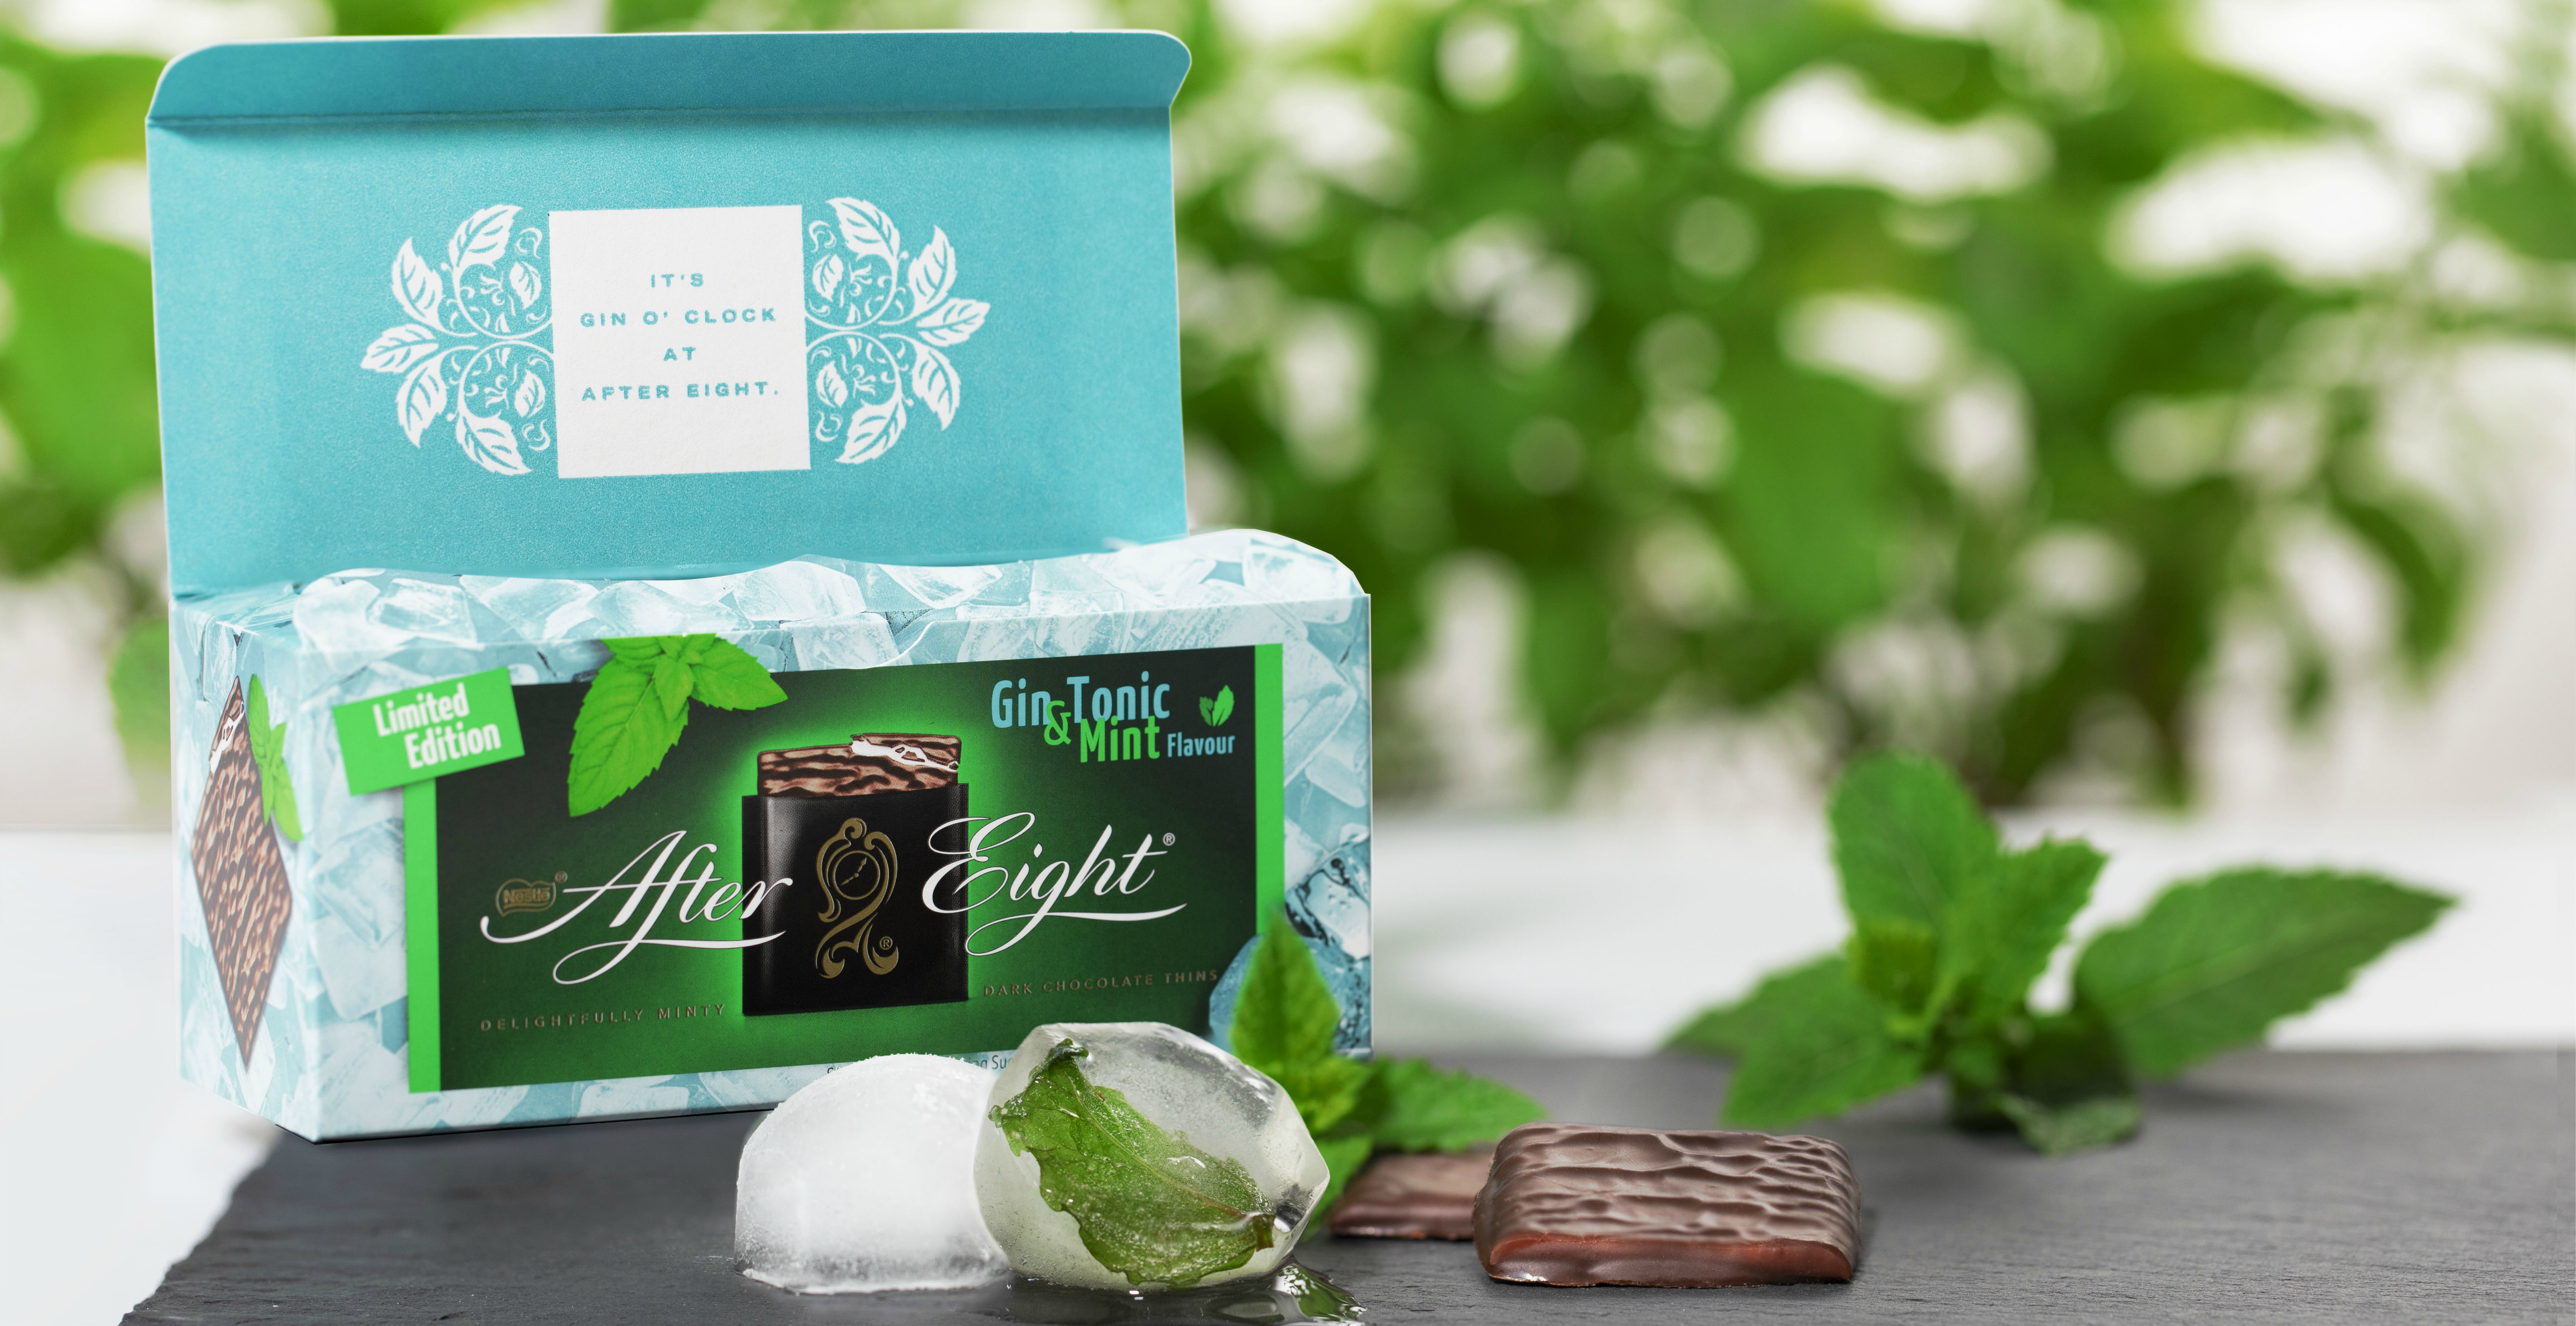 Nestlé unveils Gin & Tonic After Eight variant